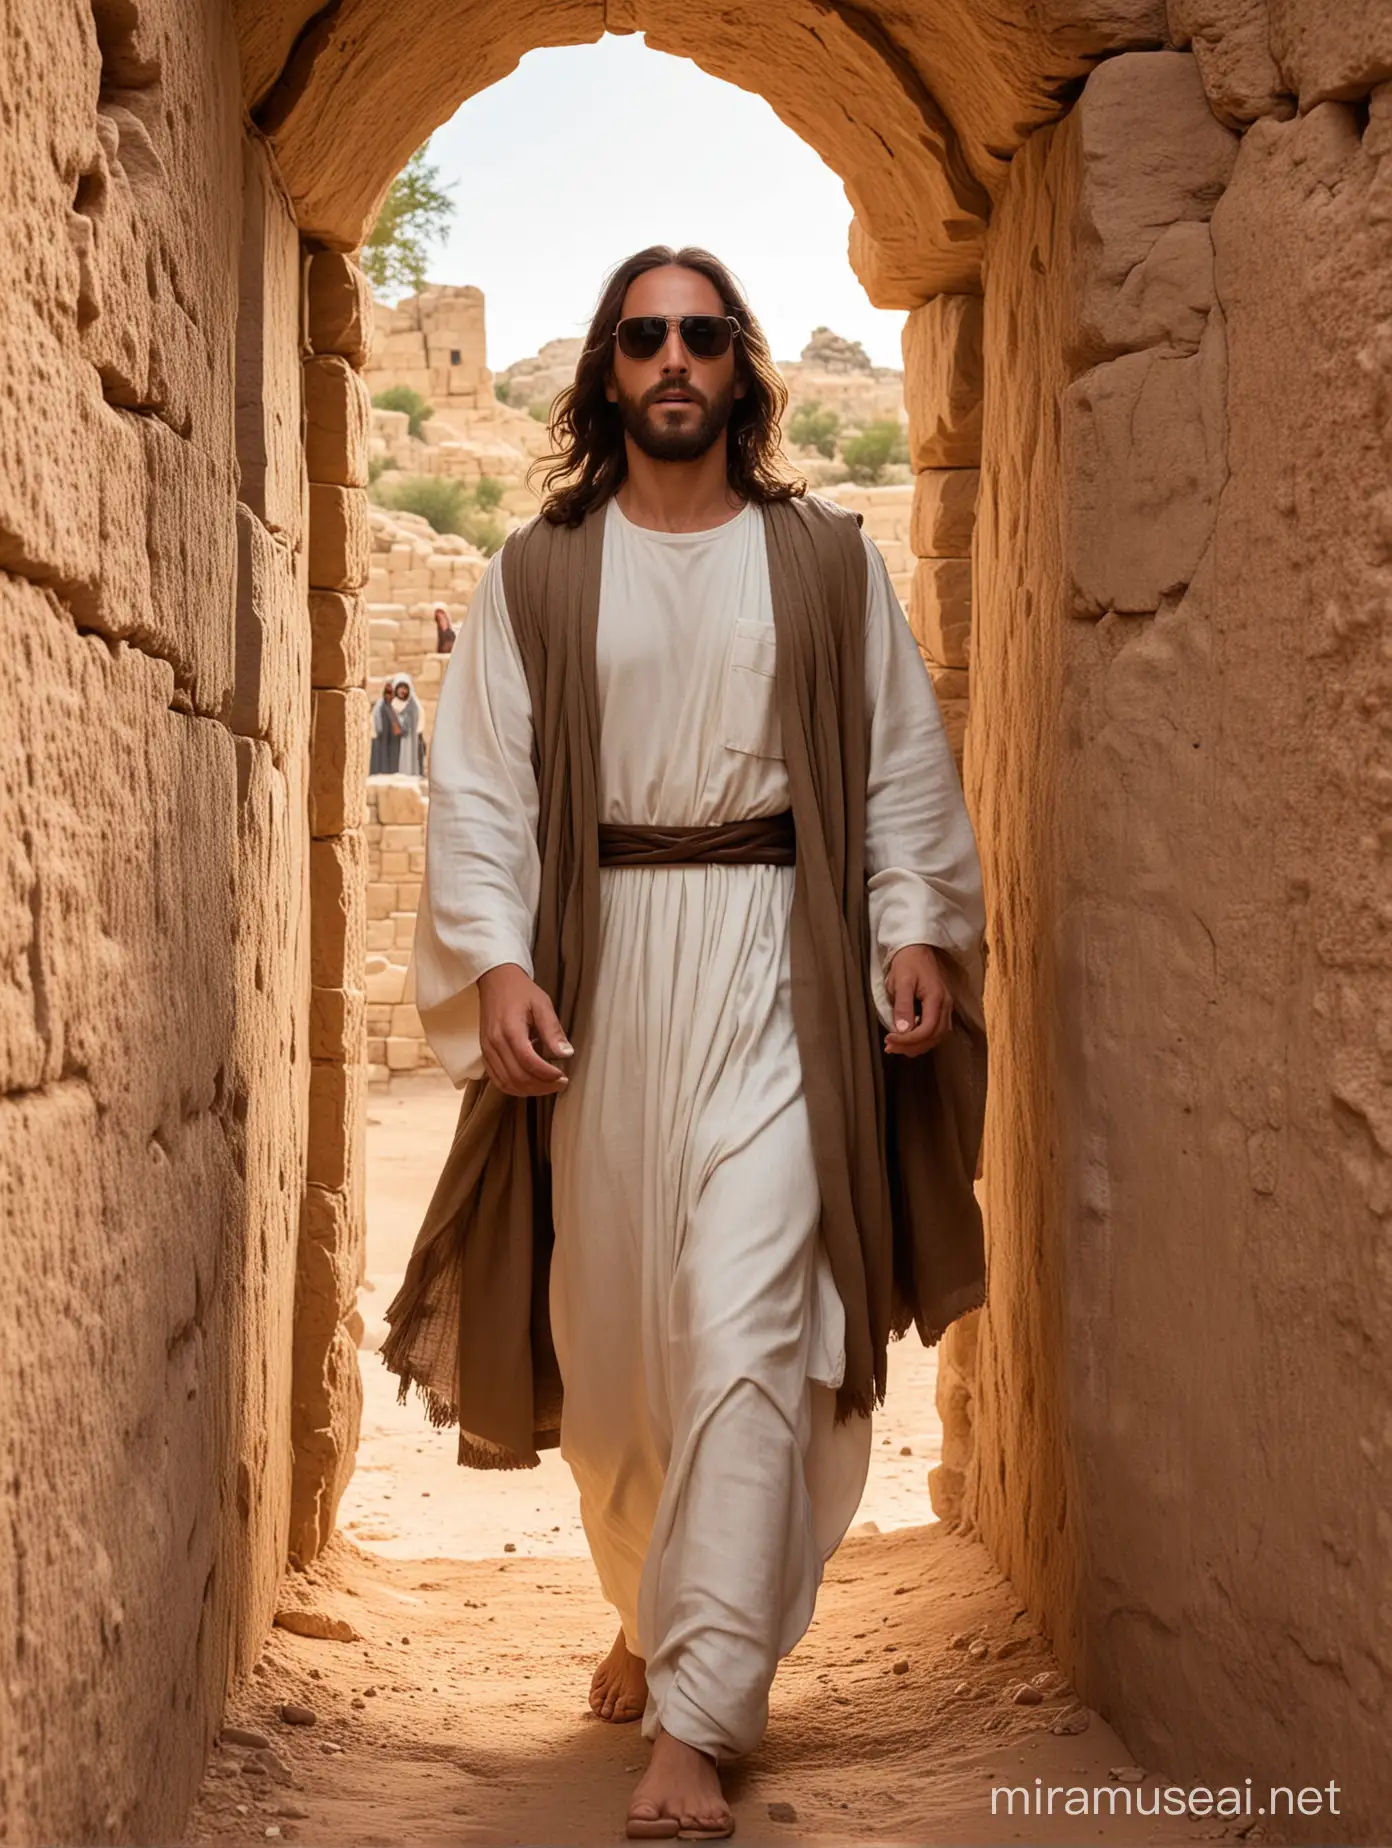 Jesus with shades leaving the tomb 